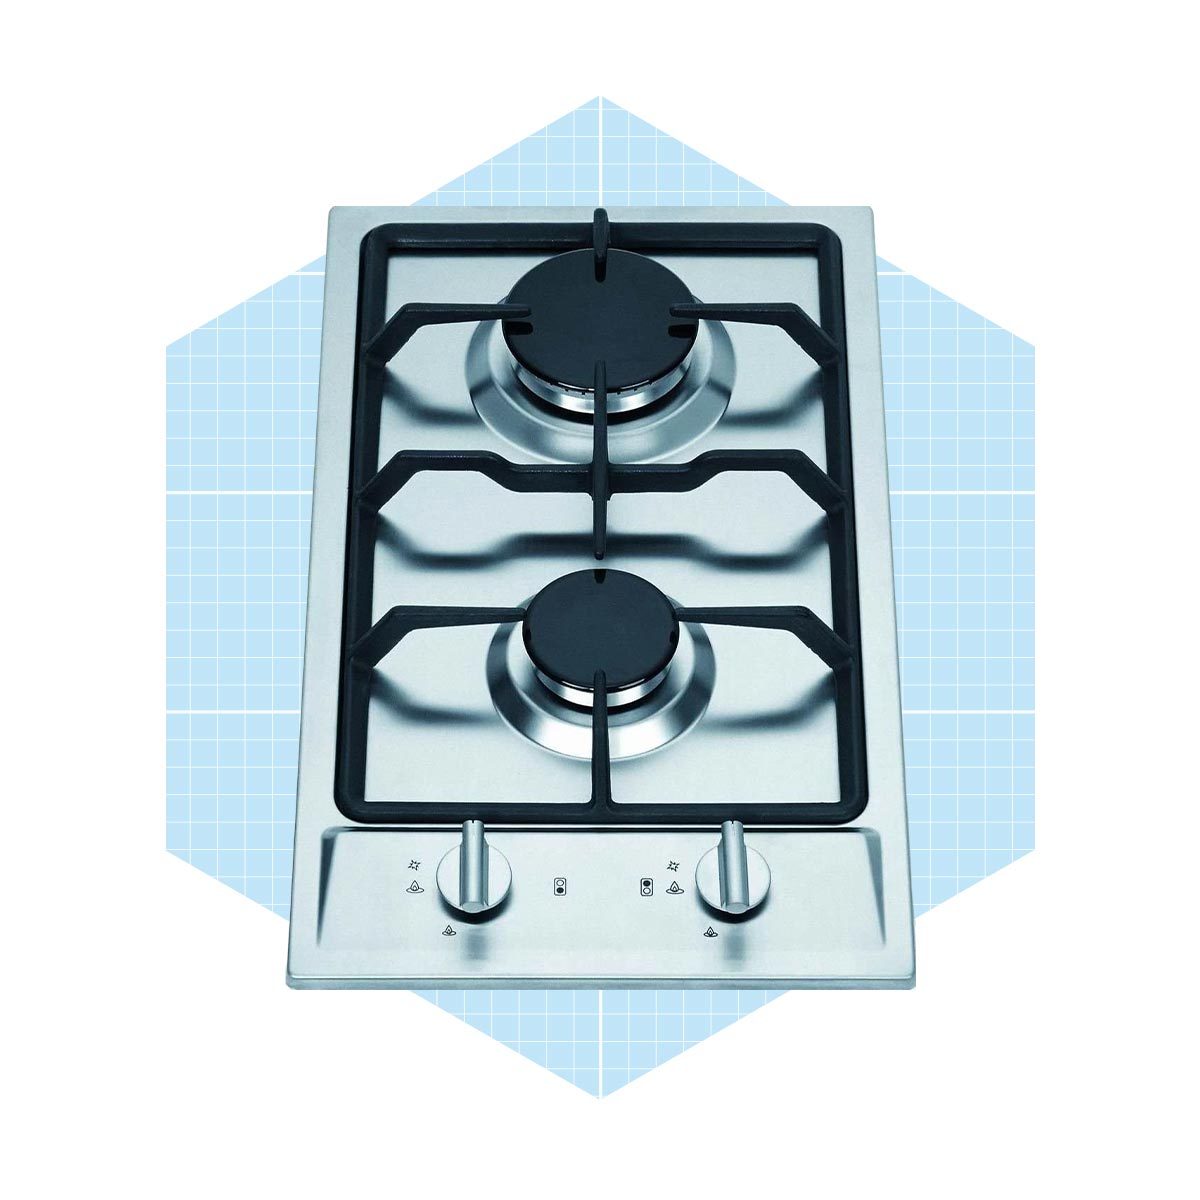 Appliances - Solo Oven: Ideal for a small kitchen - Busyboo